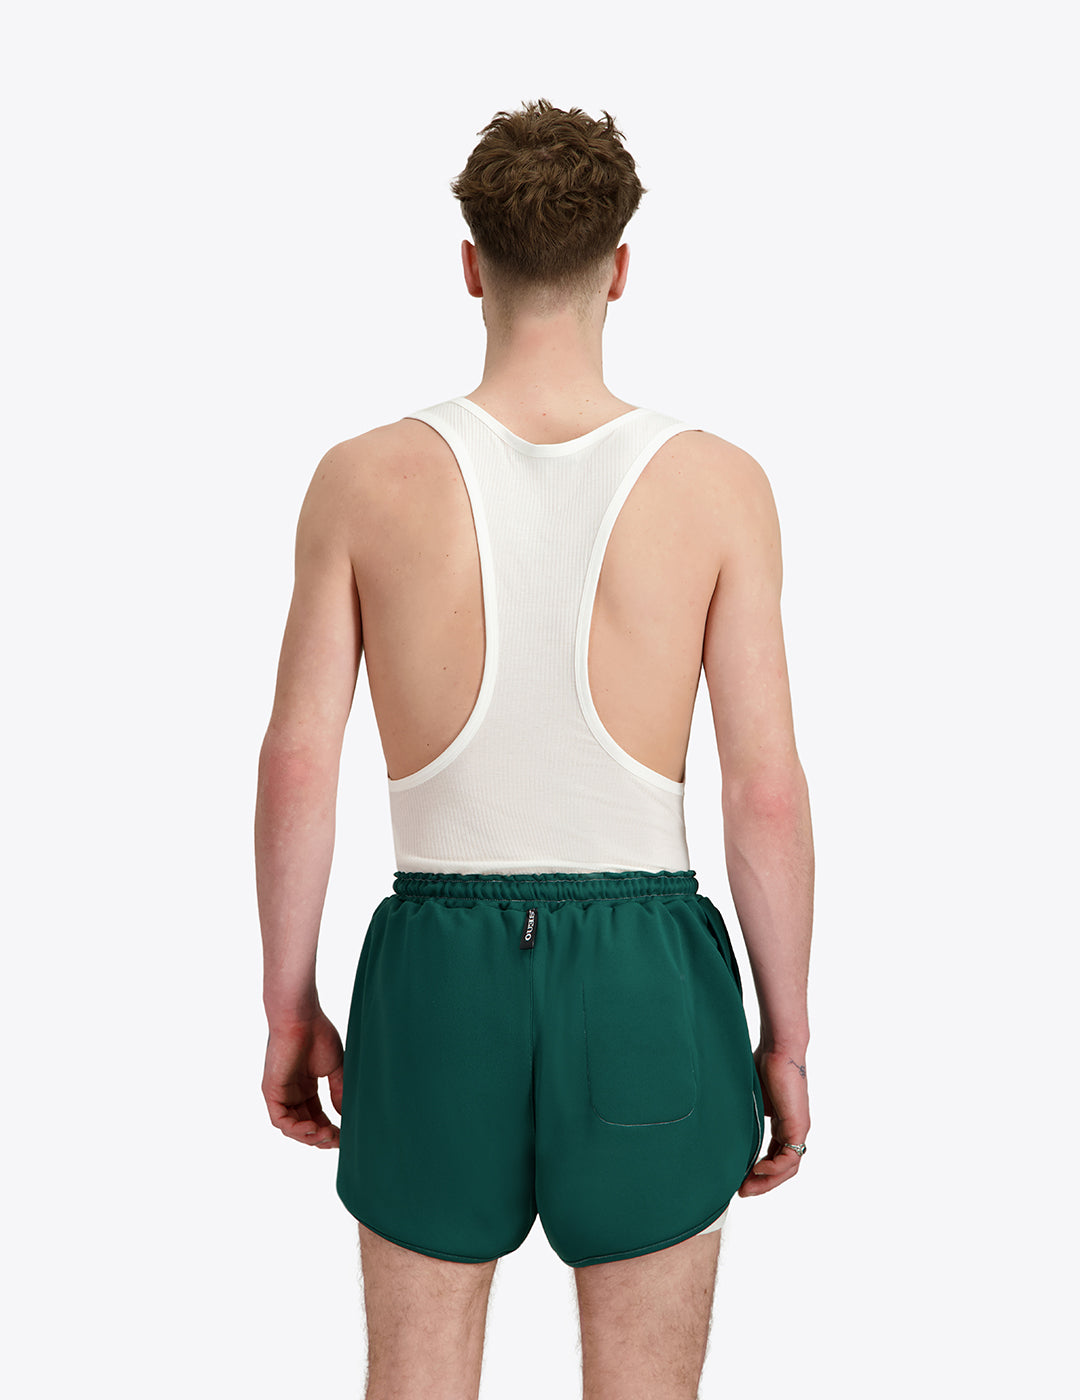 THE 70S TRACK SHORTS IN GREEN